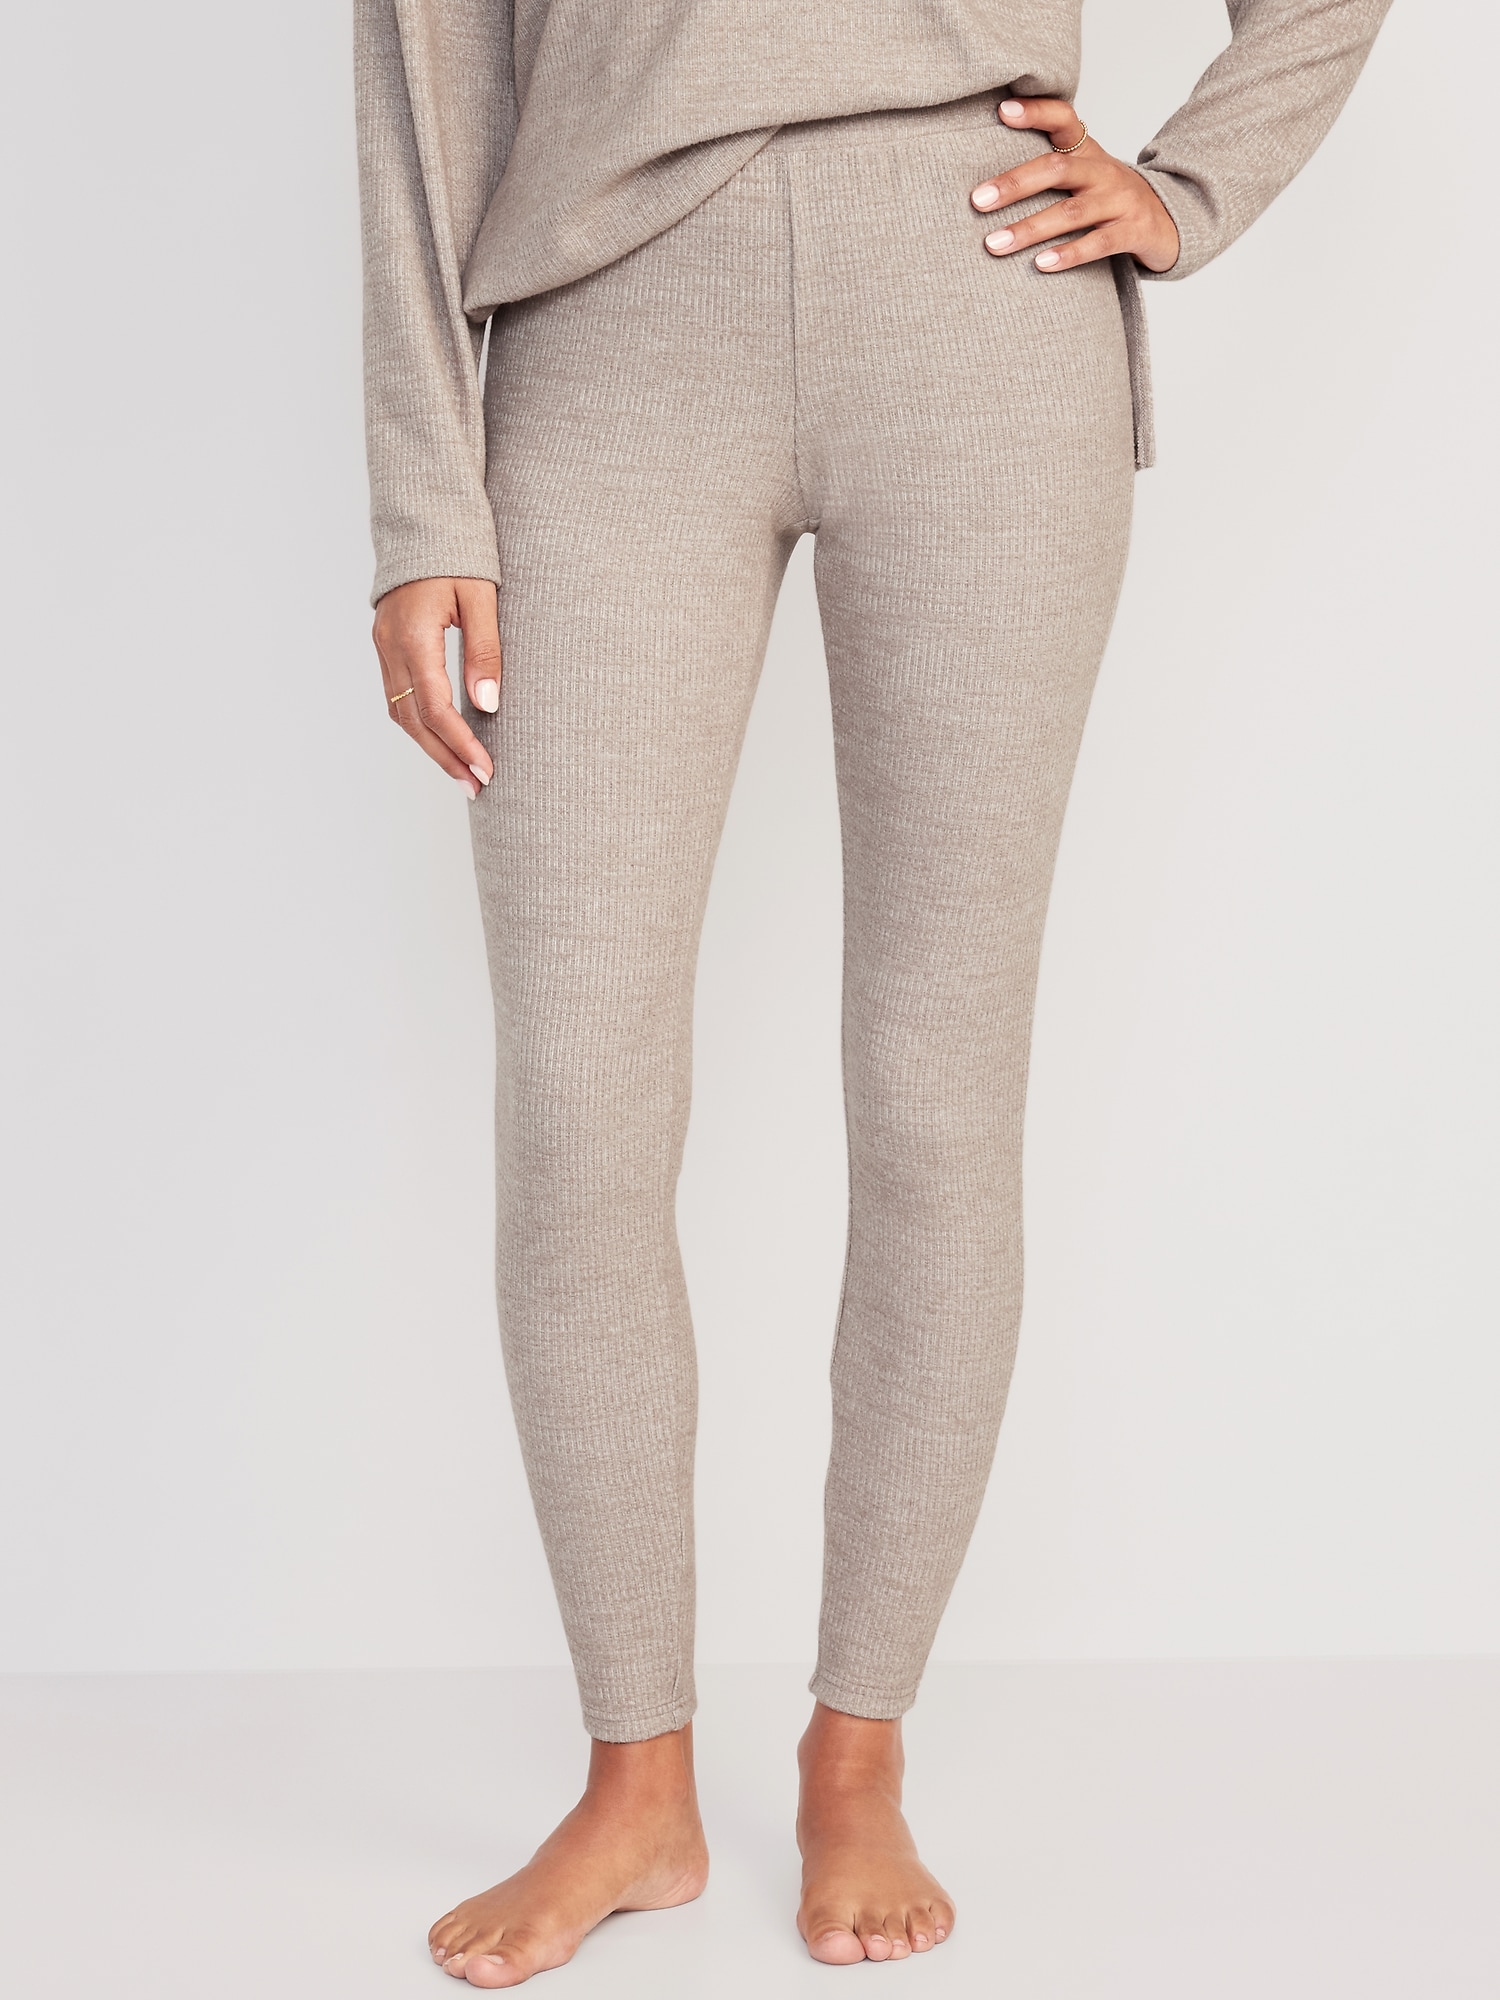 Grey Knitted Ribbed Legging, Knitwear